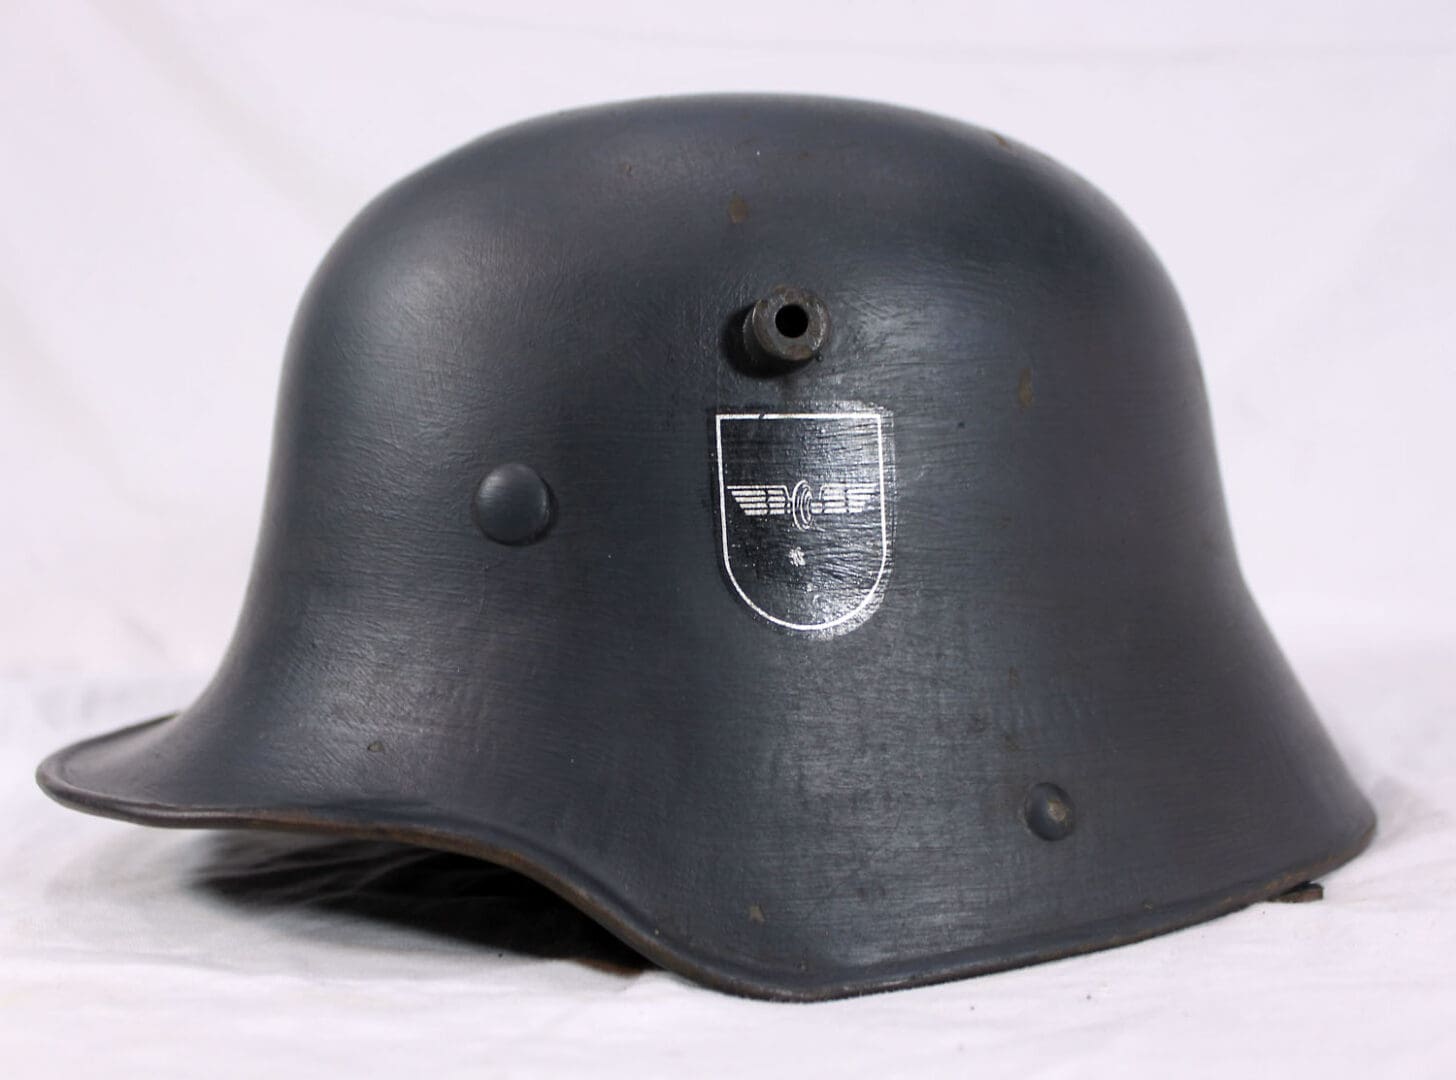 A black helmet with a patch on it